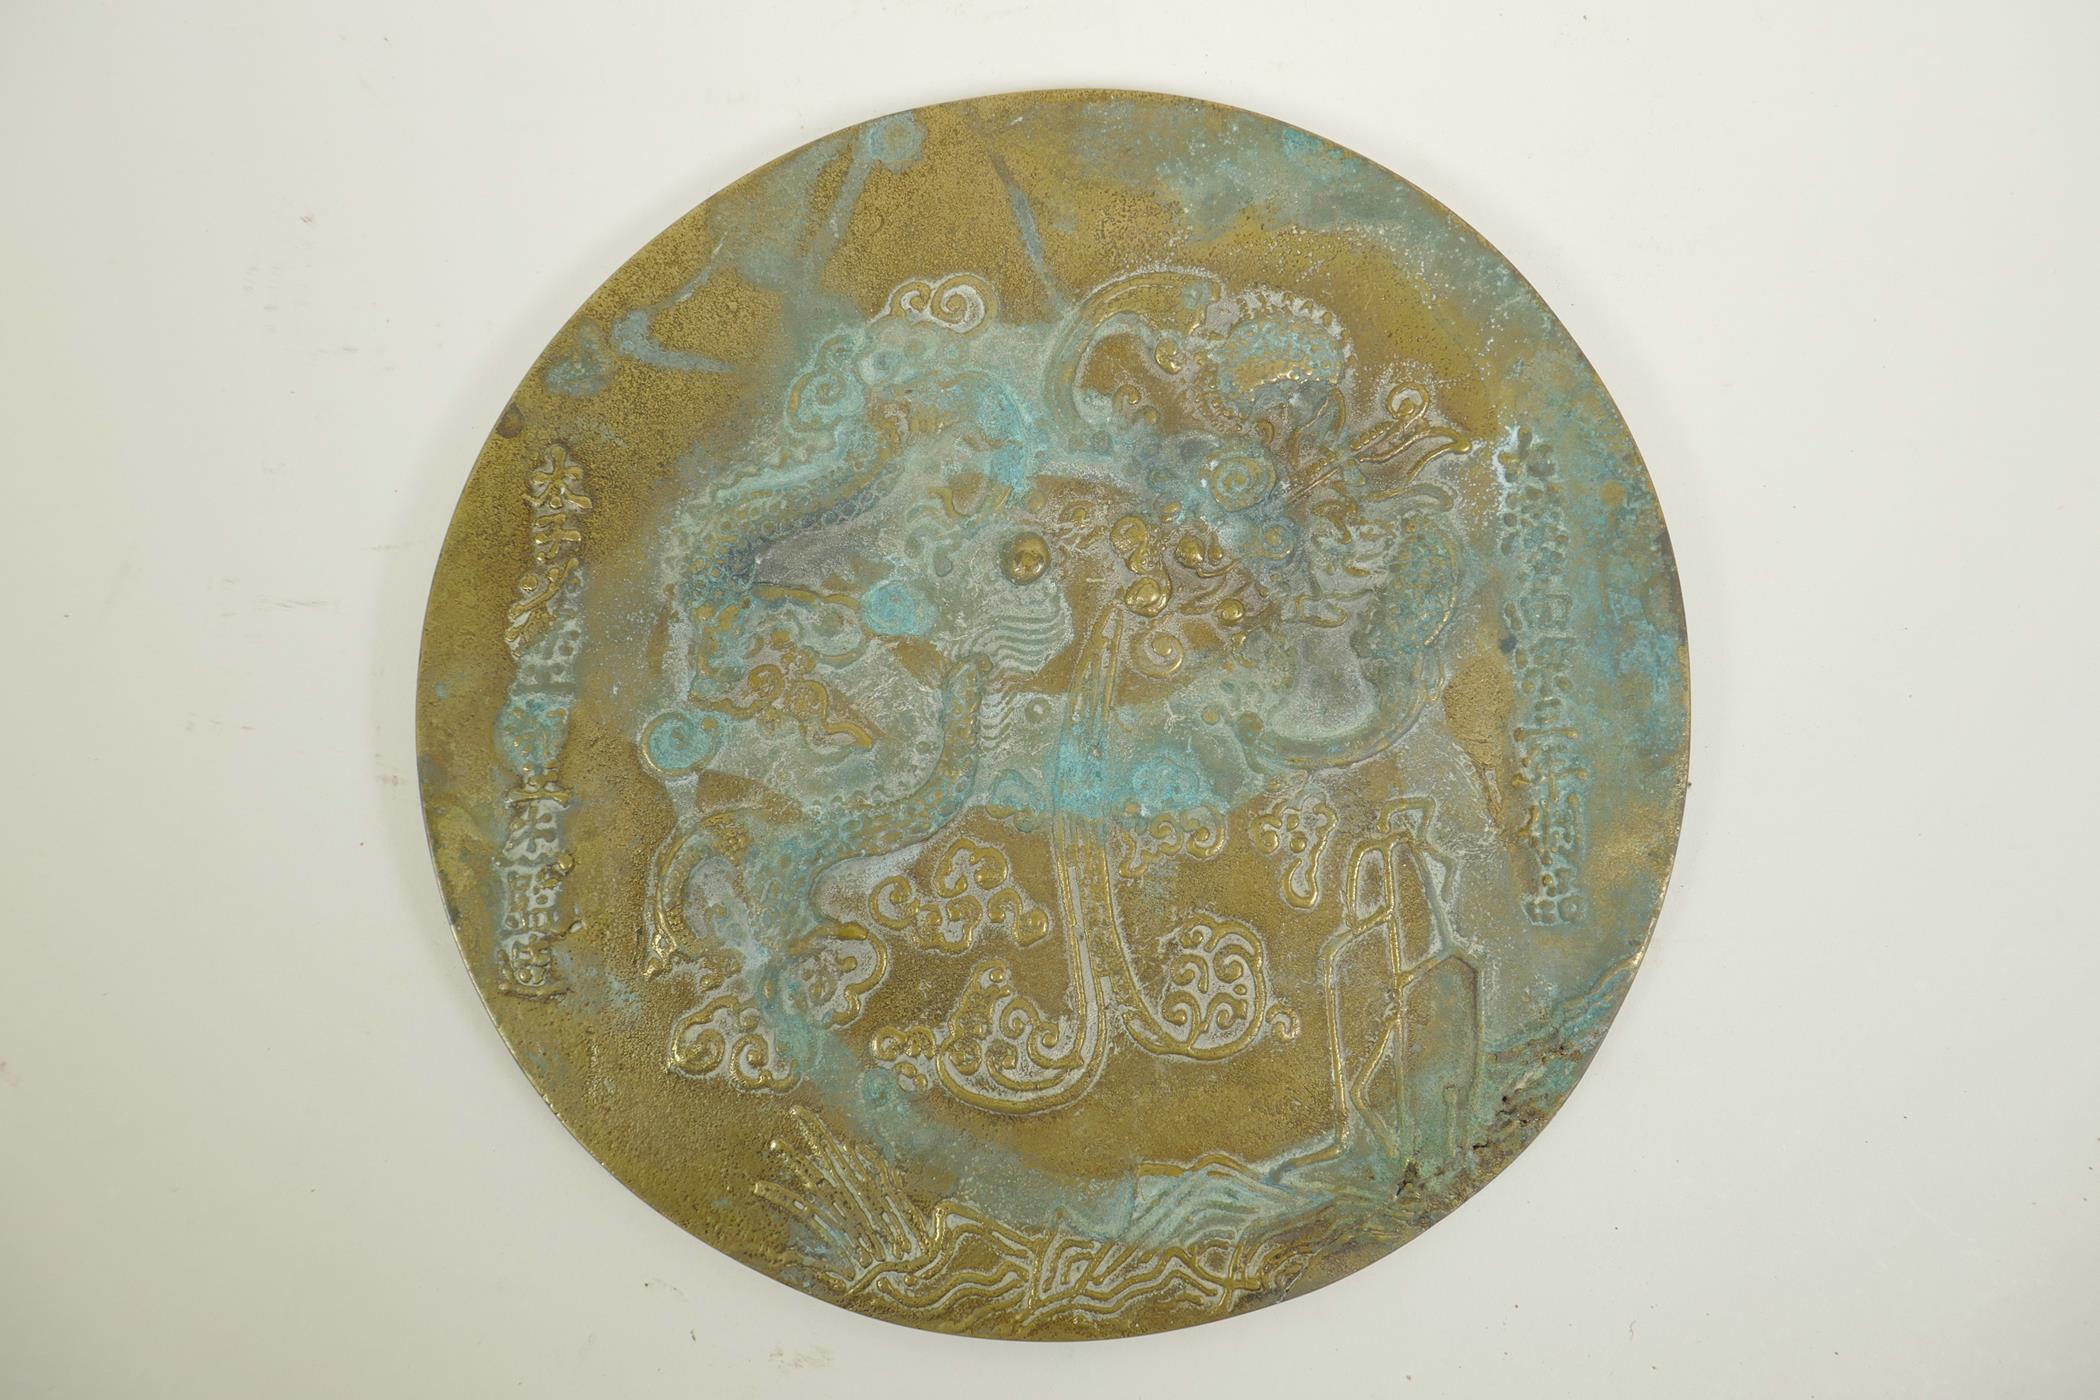 A Chinese bronze circular plaque with raised dragon and character decoration, 9½" diameter